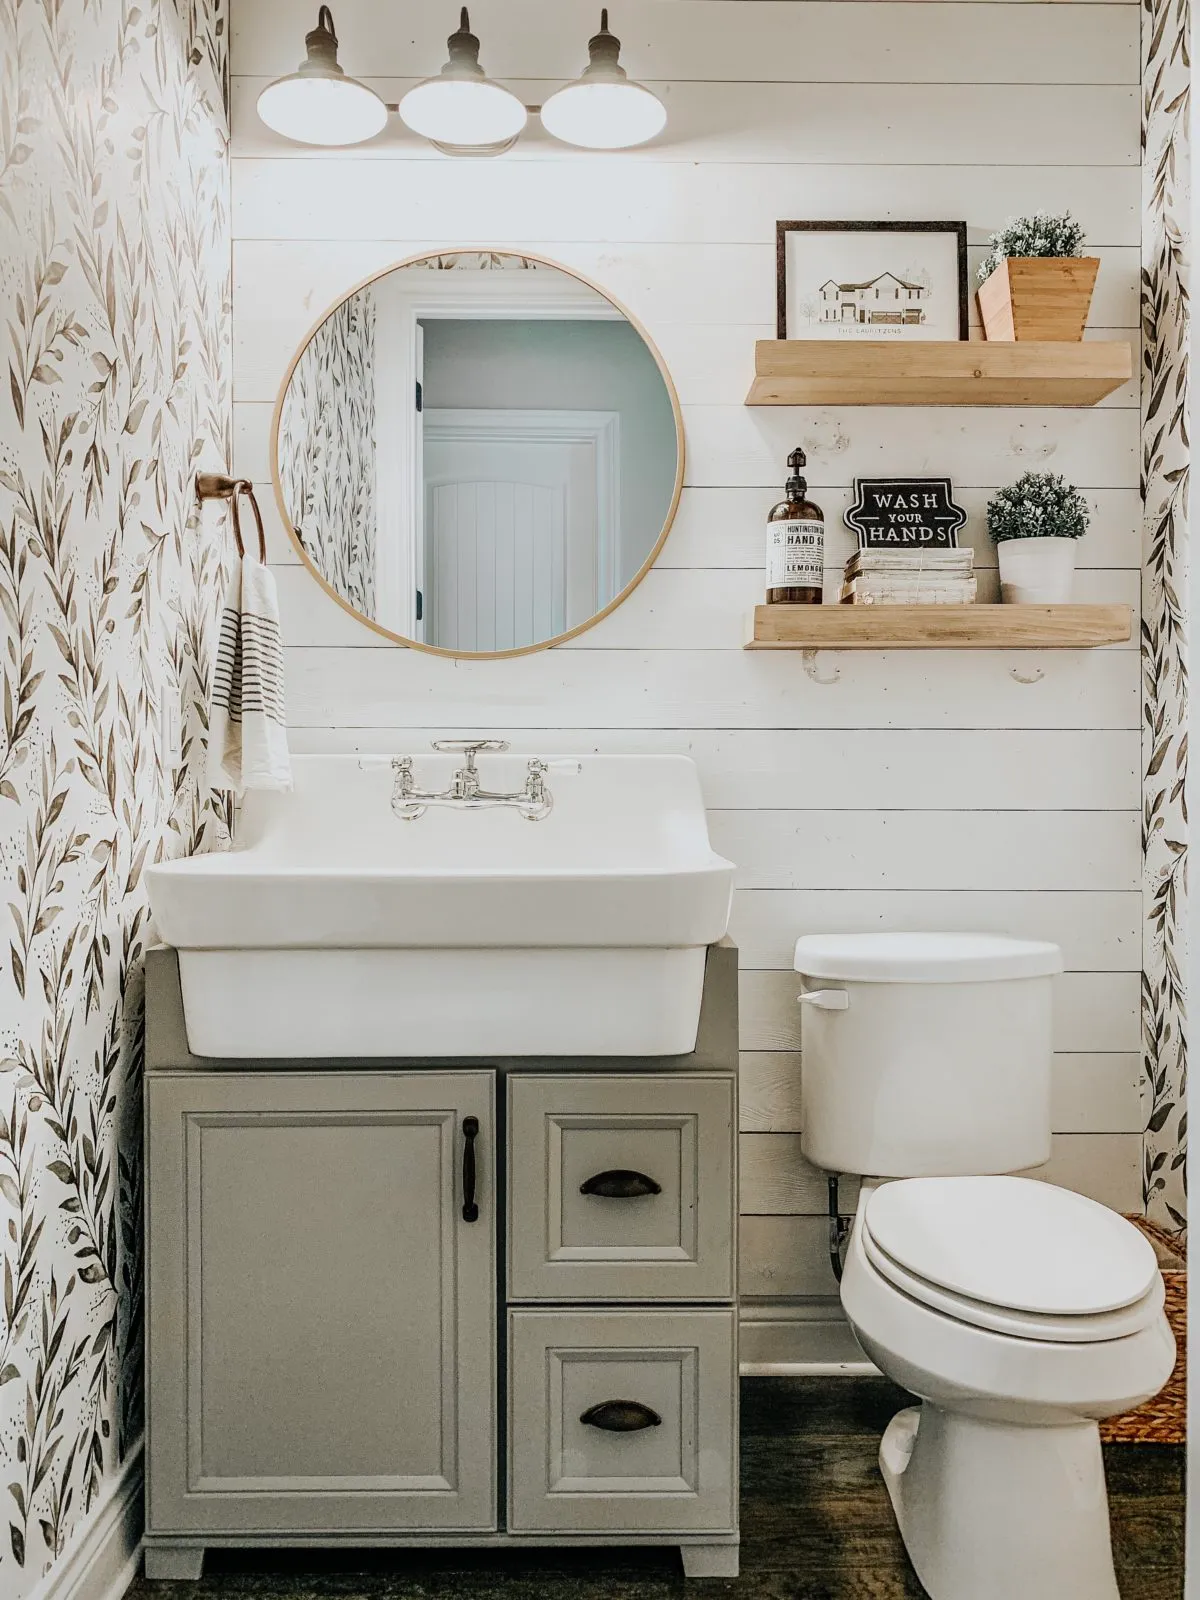 Sage green cabinet with apron sink, patterned wallpaper with sage green leaves, shiplap wall. 